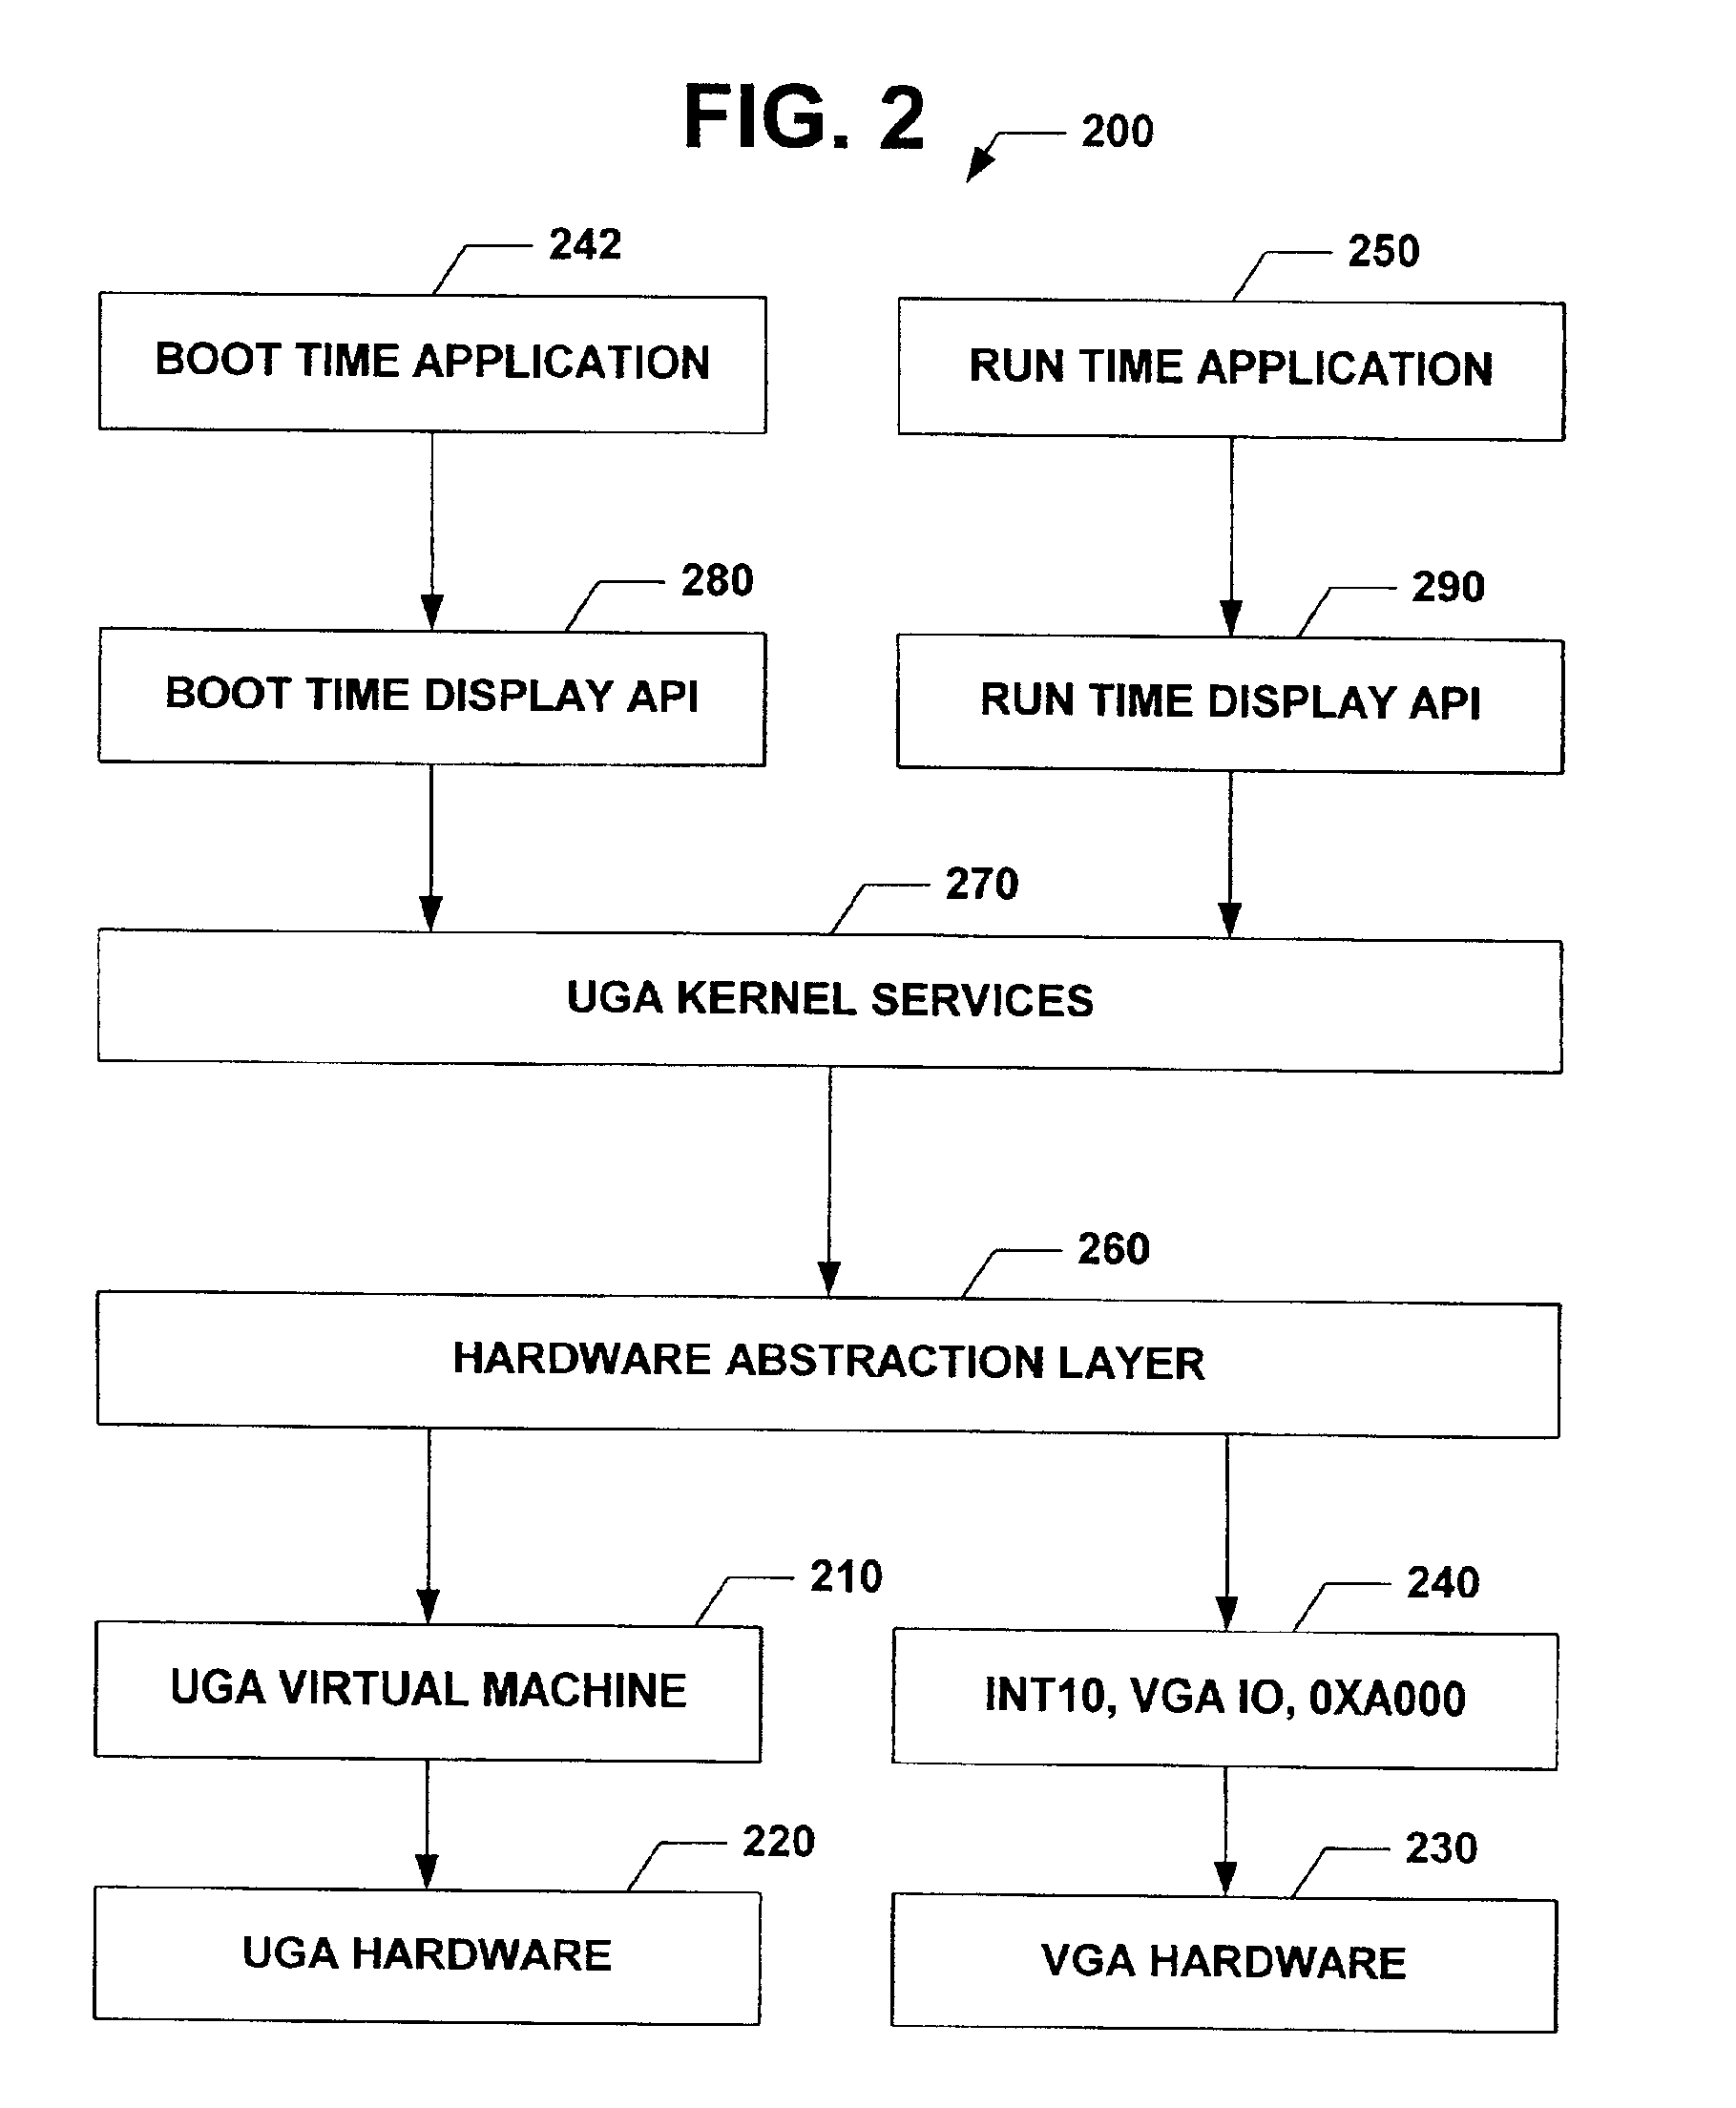 Universal graphic adapter for interfacing with hardware and means for encapsulating and abstracting details of the hardware